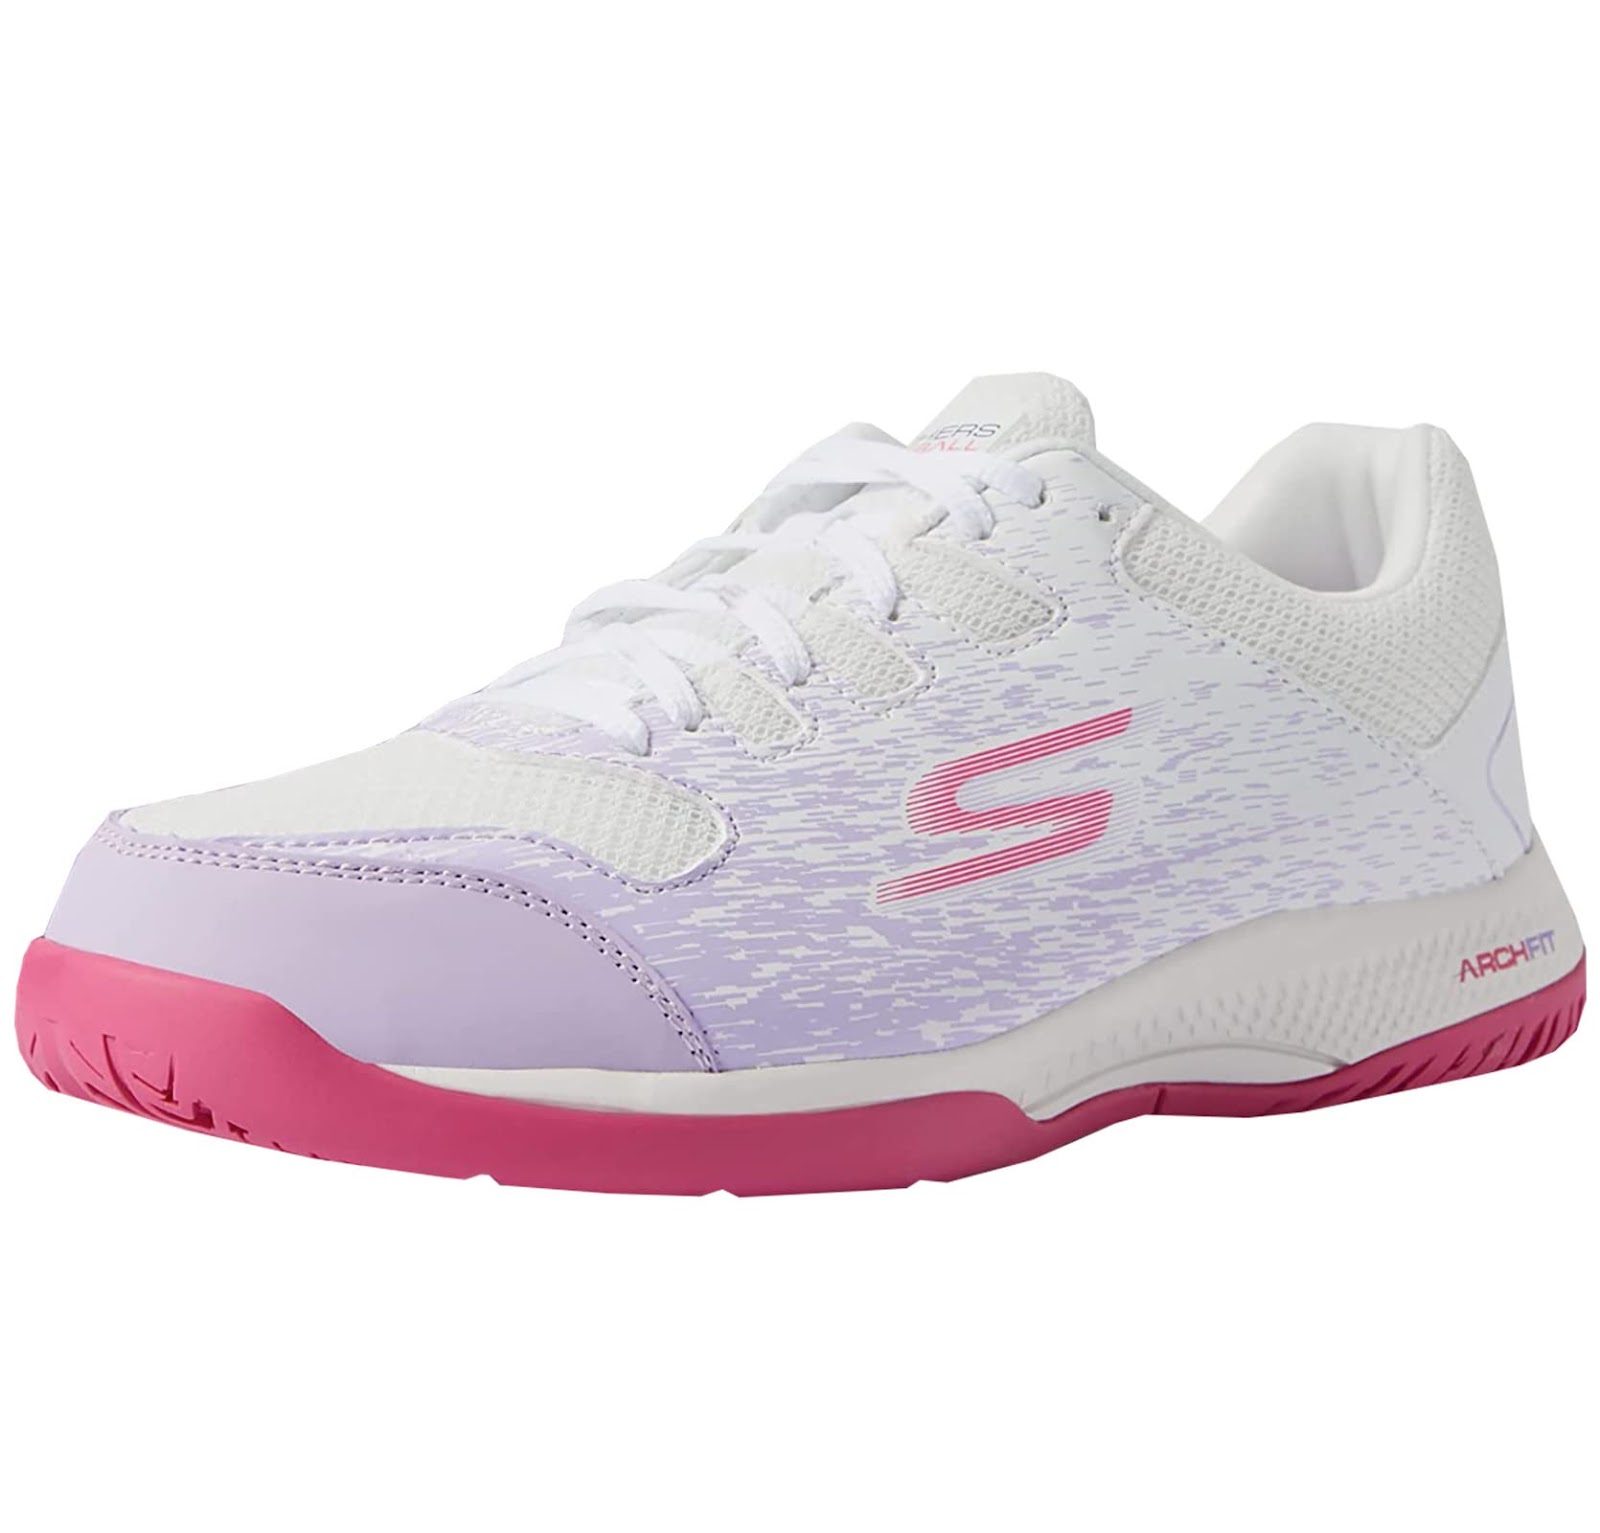 Skechers Women's Viper Court-Athletic Indoor Outdoor Pickleball Shoes with Arch Fit Support Sneakers 8 White/Lavender